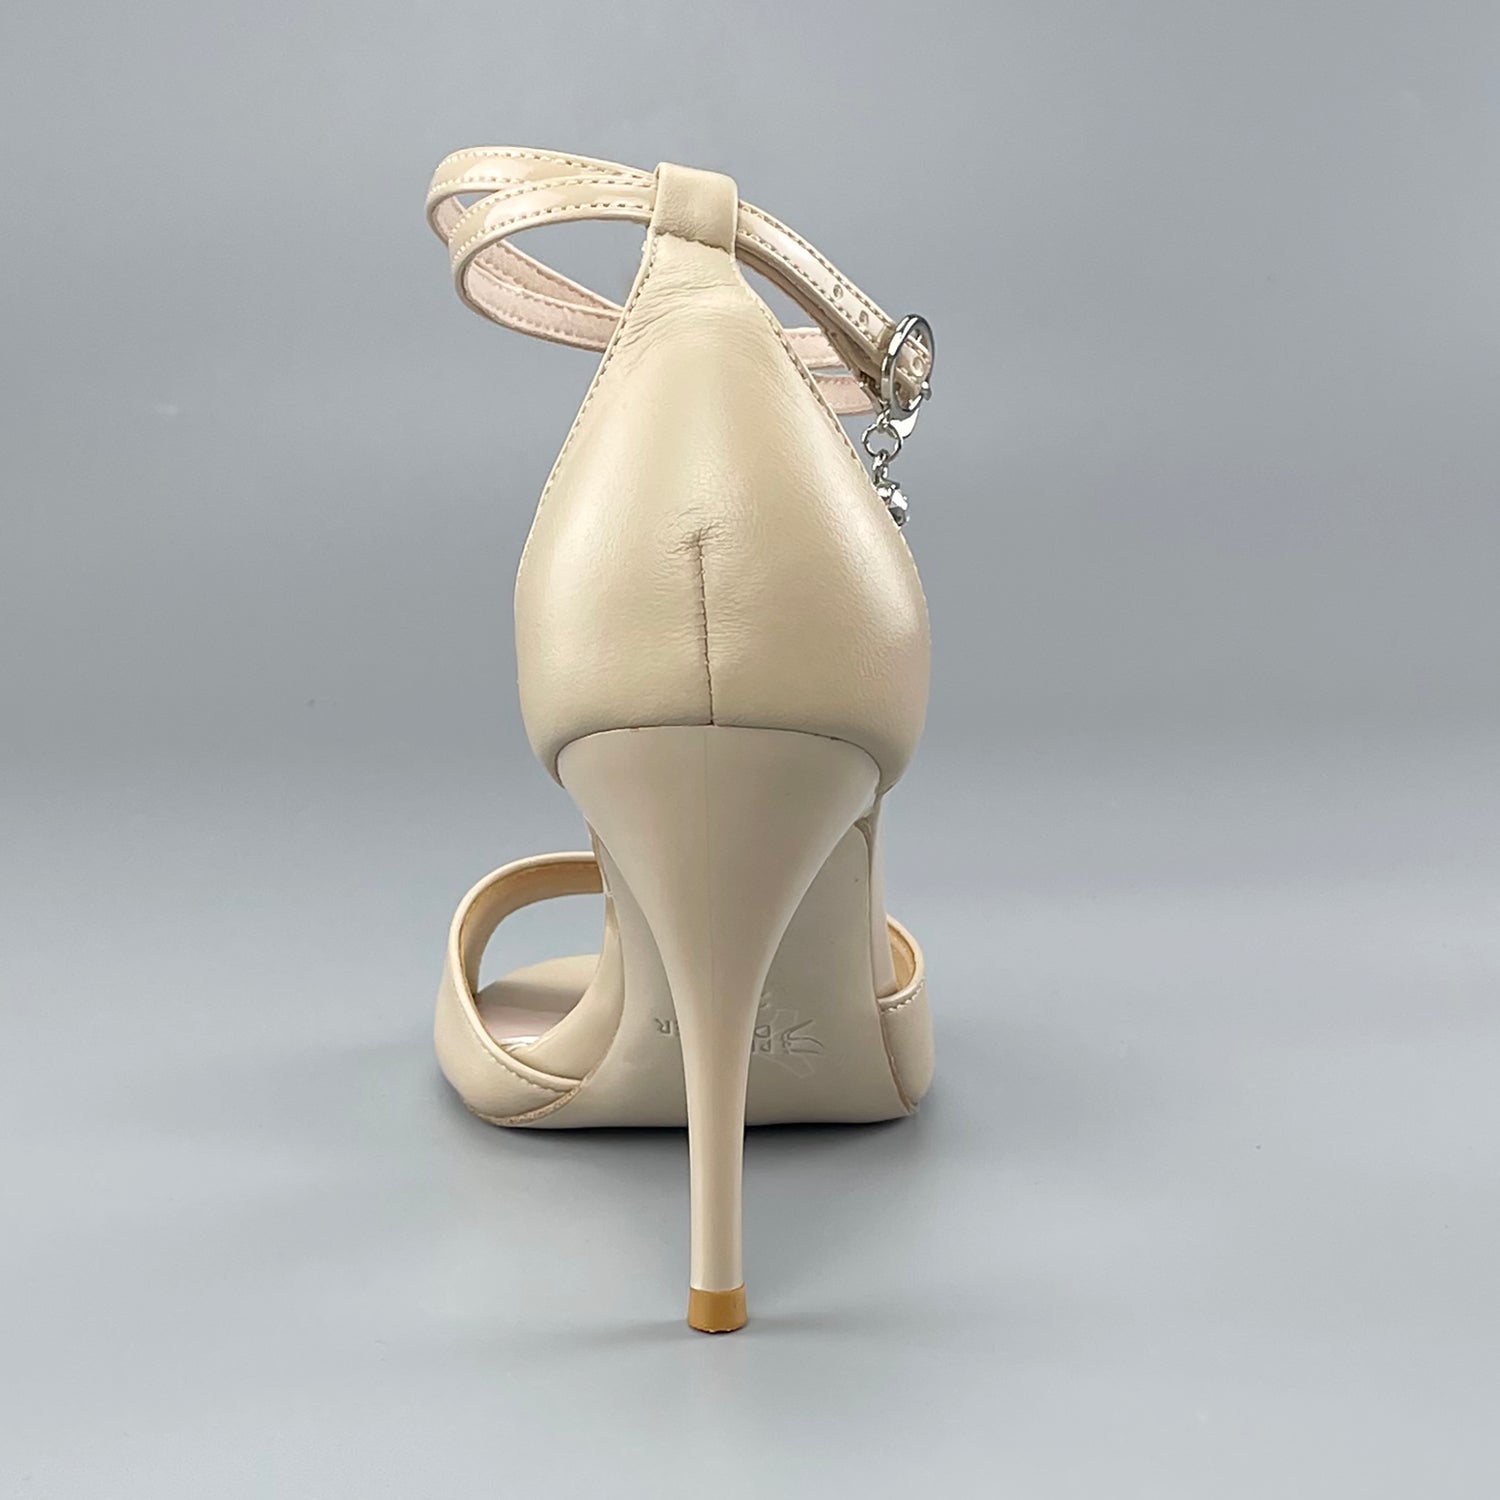 Pro Dancer Peep-toe Tango Shoes with Closed-back High Heels and Hard Leather Sole in Nude color for Argentine Tango (PD-9047A)4